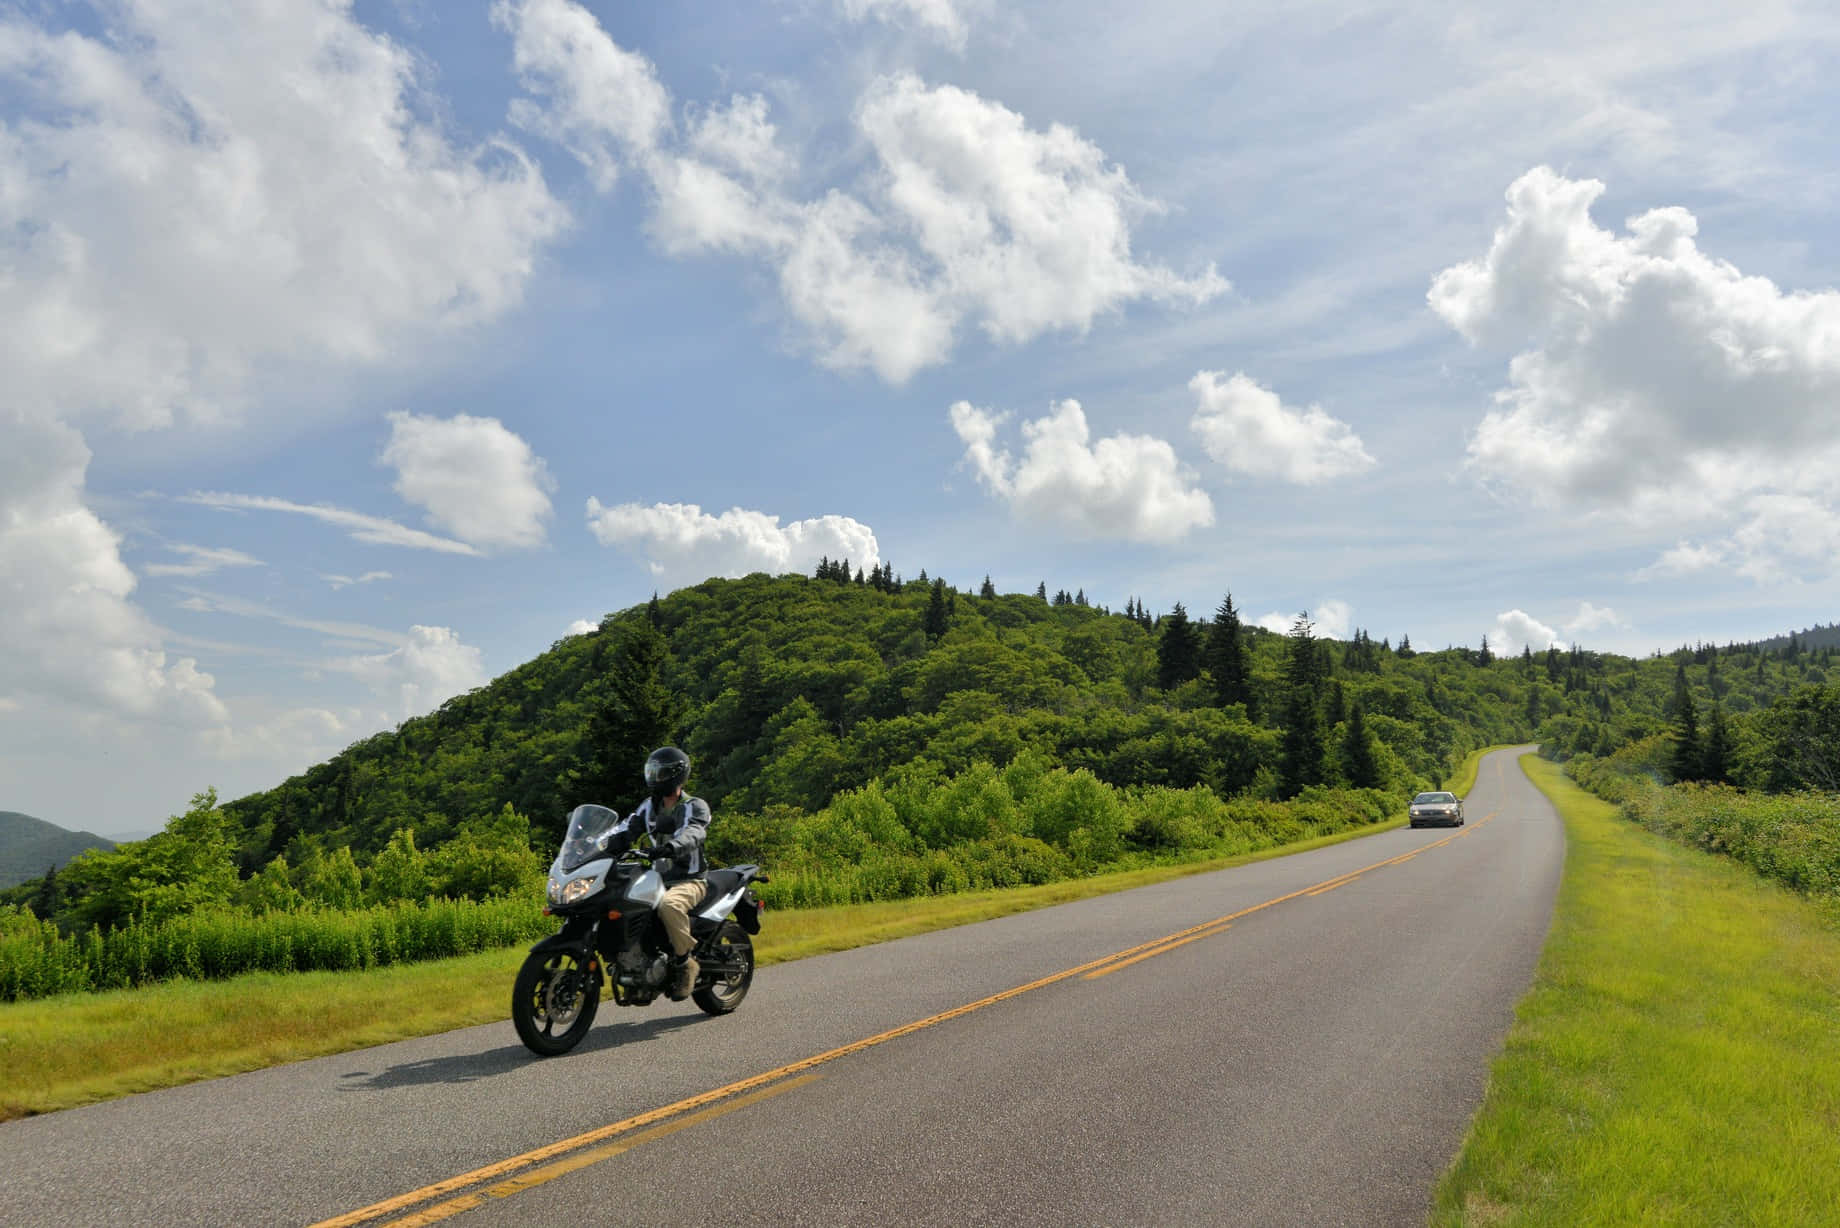 Take in the beauty of the Blue Ridge Parkway on your next trip! Wallpaper